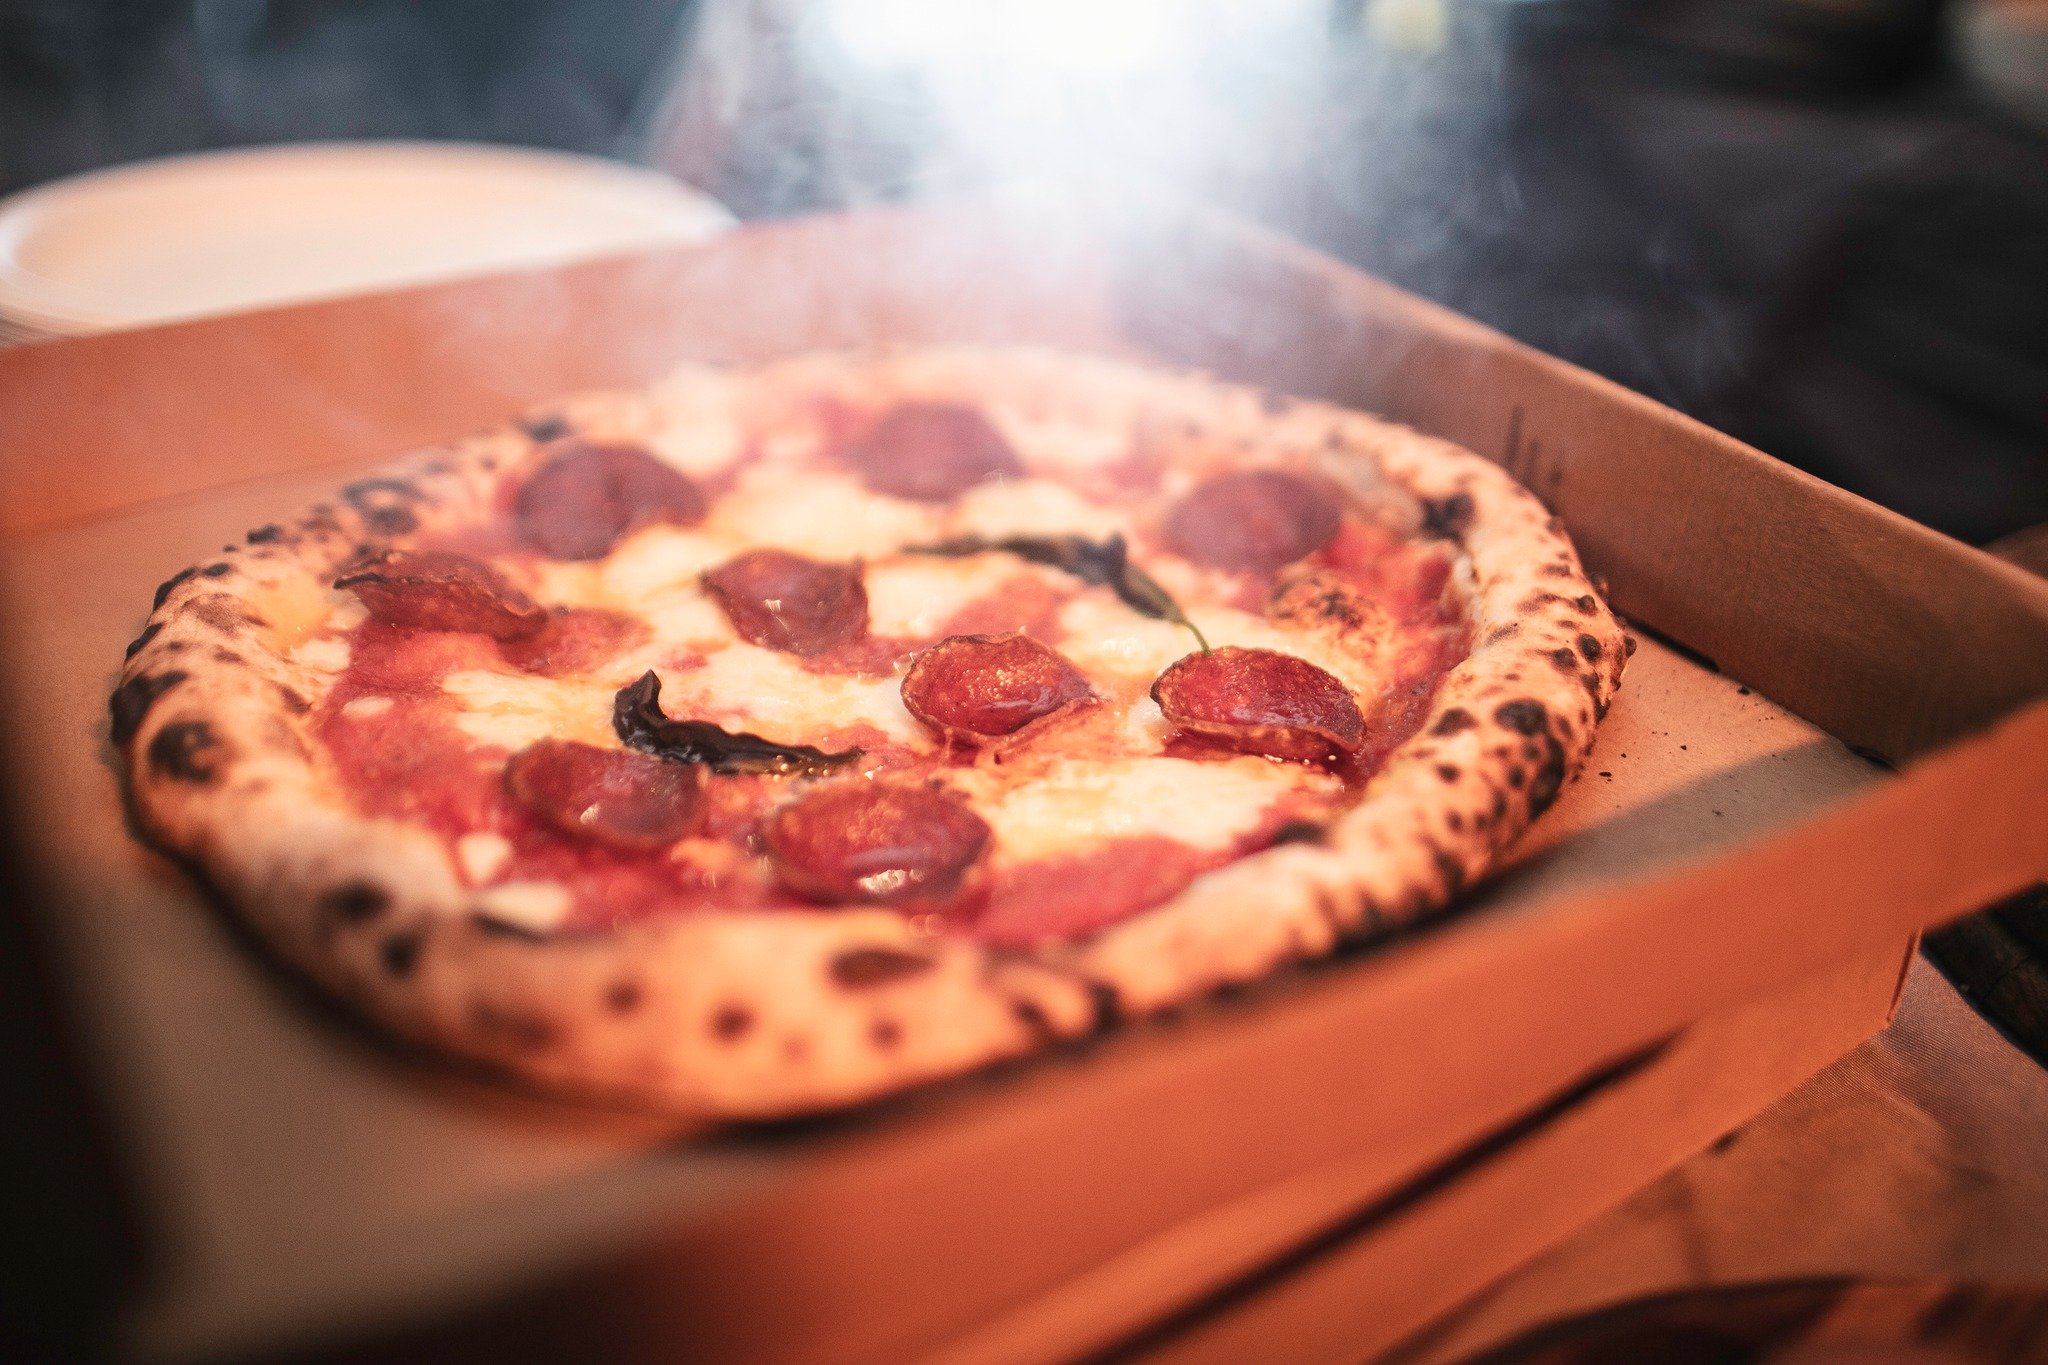 Don't miss out! @theslowdoughpizzaco returns on Tuesday night from 5.30pm, it's seriously great pizza! Wednesday marks the comeback of @adamspubquiz Watfords, best quiz! Book your spot now! 

#RoyalOakPizzaNight #SlowDoughPizzaCo #AdamsPubQuiz #BookN